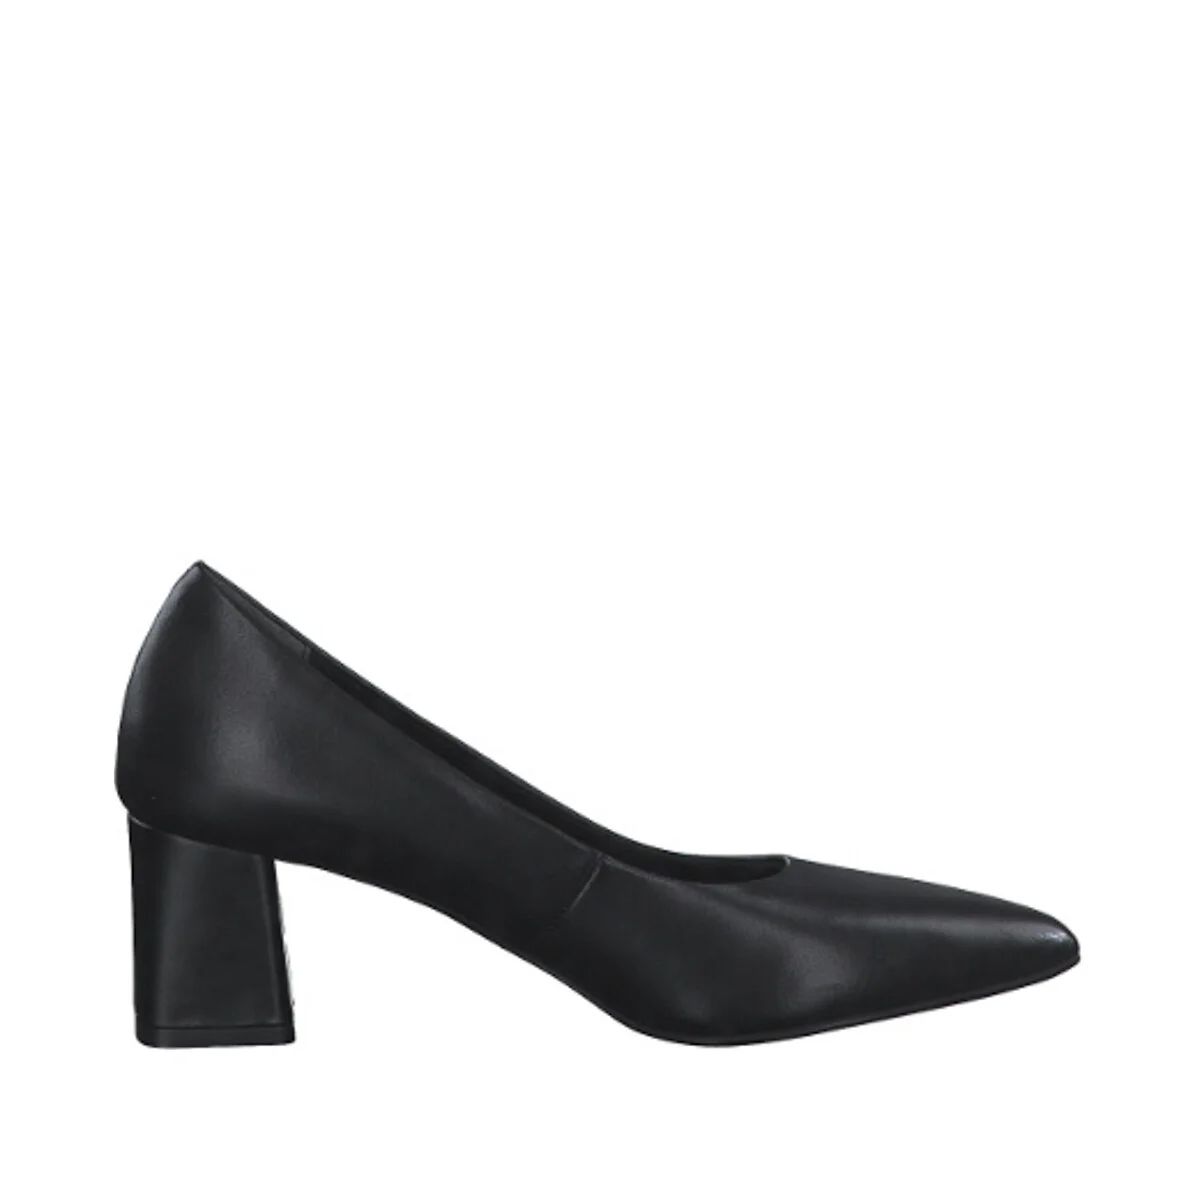 Leather Pointed Toe Heels | La Redoute (UK)